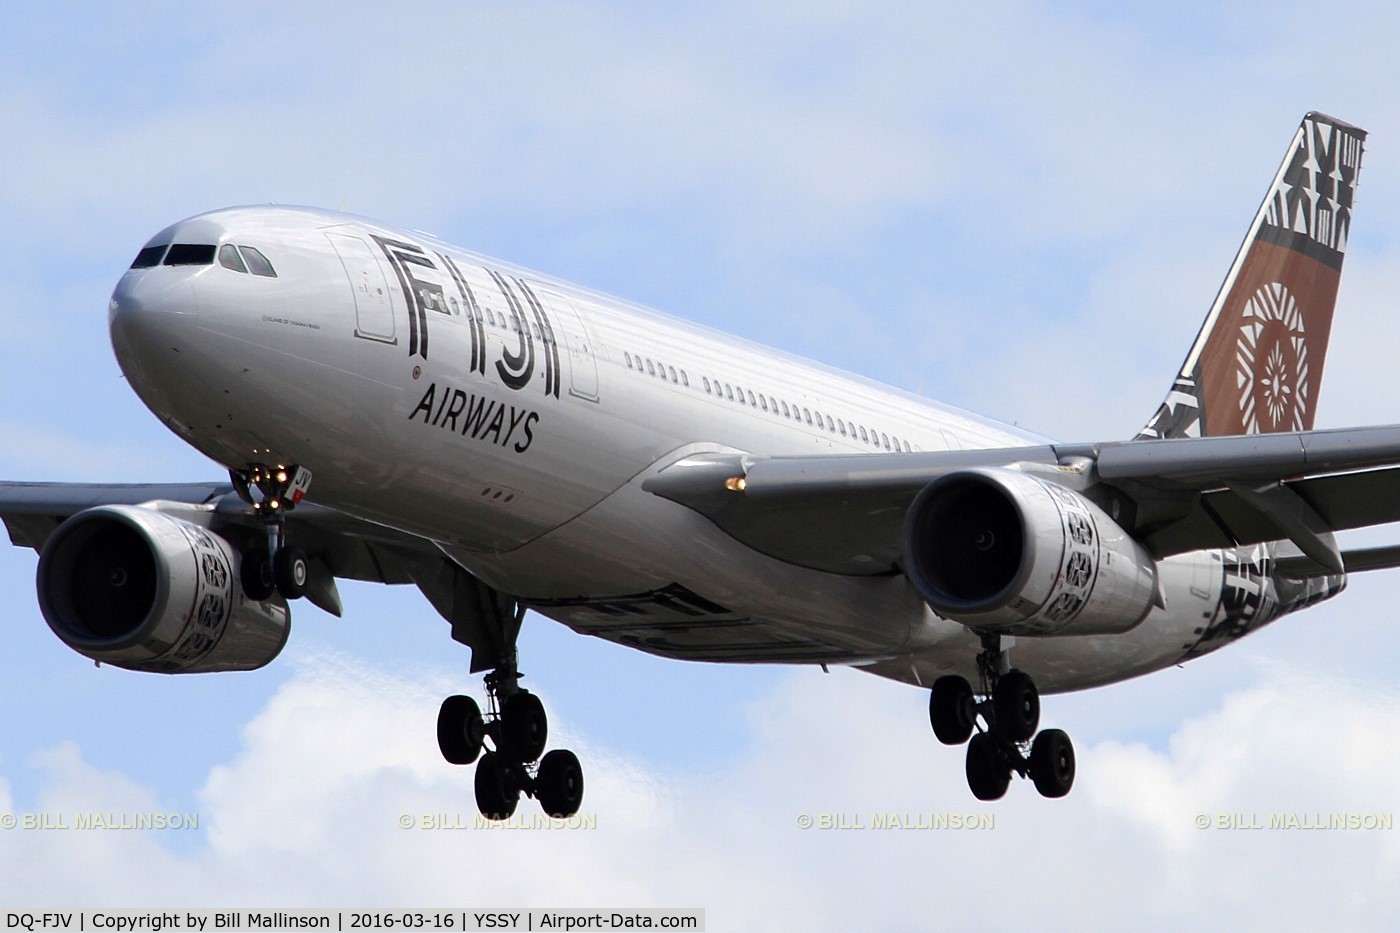 DQ-FJV, 2013 Airbus A330-243 C/N 1465, finals to 16R